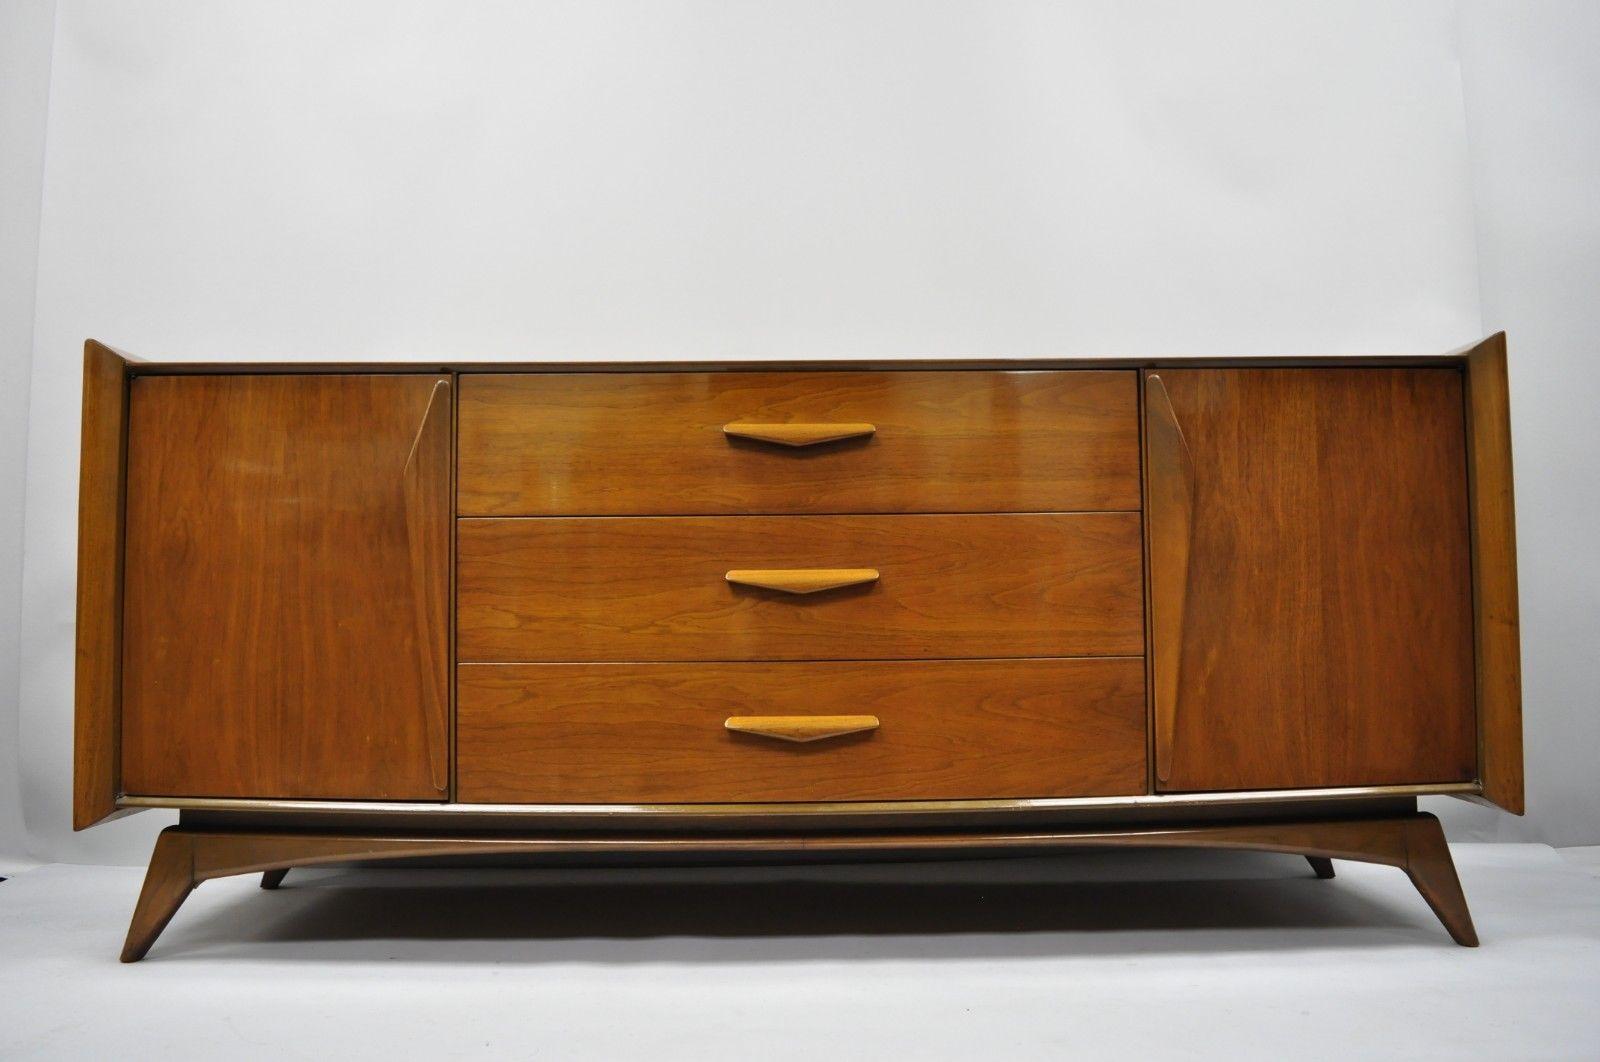 Mid-Century Modern sculpted walnut credenza long dresser. Item features raised panel sculpted wood sides, sculpted wood pulls, beautiful wood grain, 2 swing doors, 9 dovetailed drawers, tapered legs, sleek sculptural form, circa 1960. Measurements: